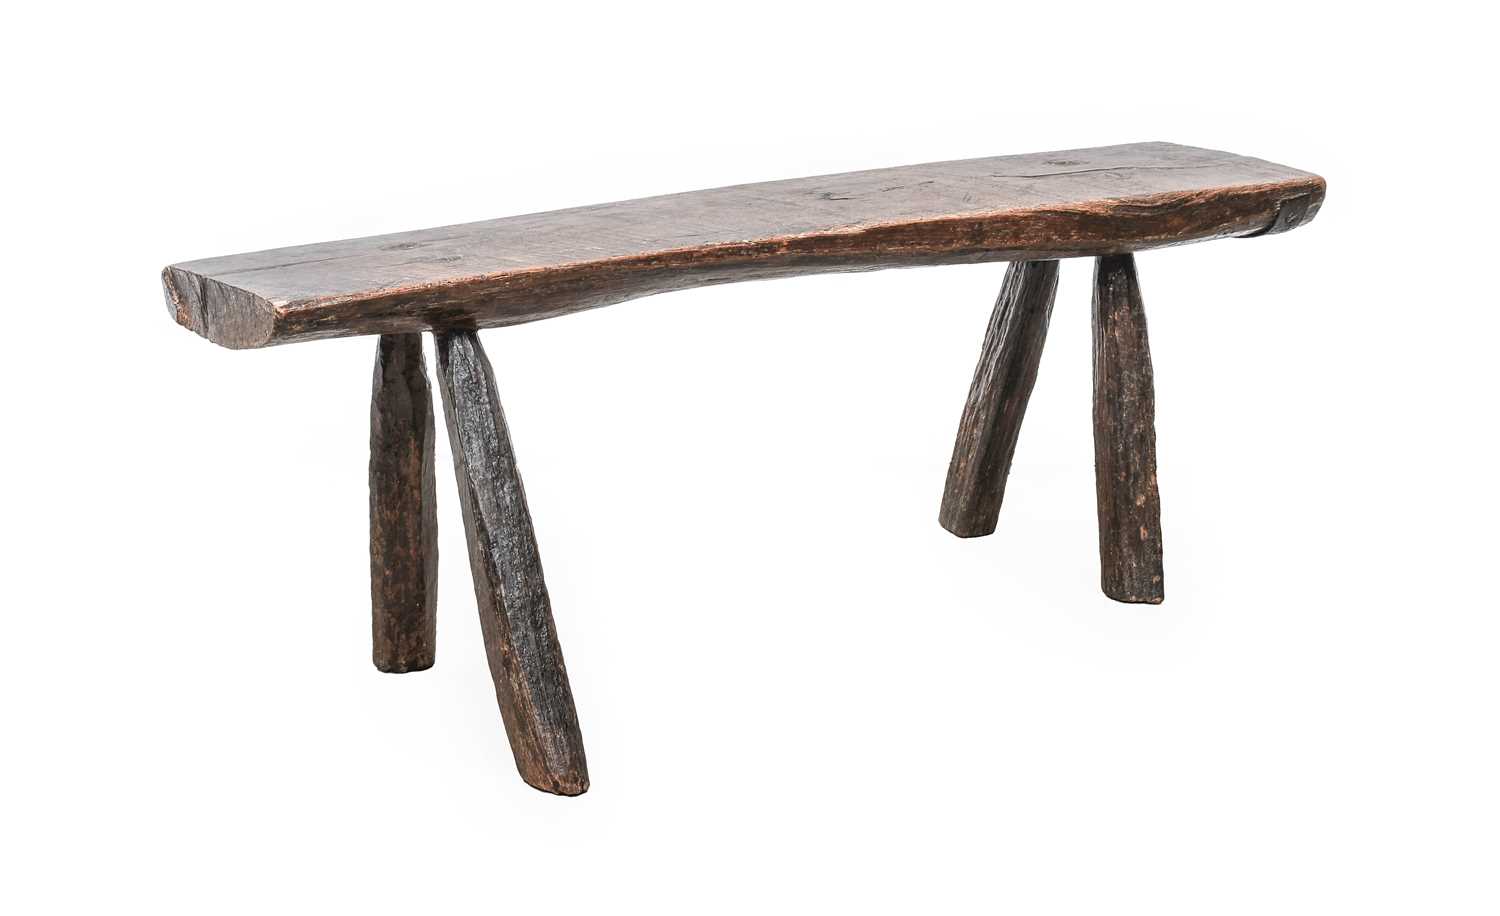 A Late 18th/Early 19th Century Provincial Oak Form, of pegged construction, the rectangular seat